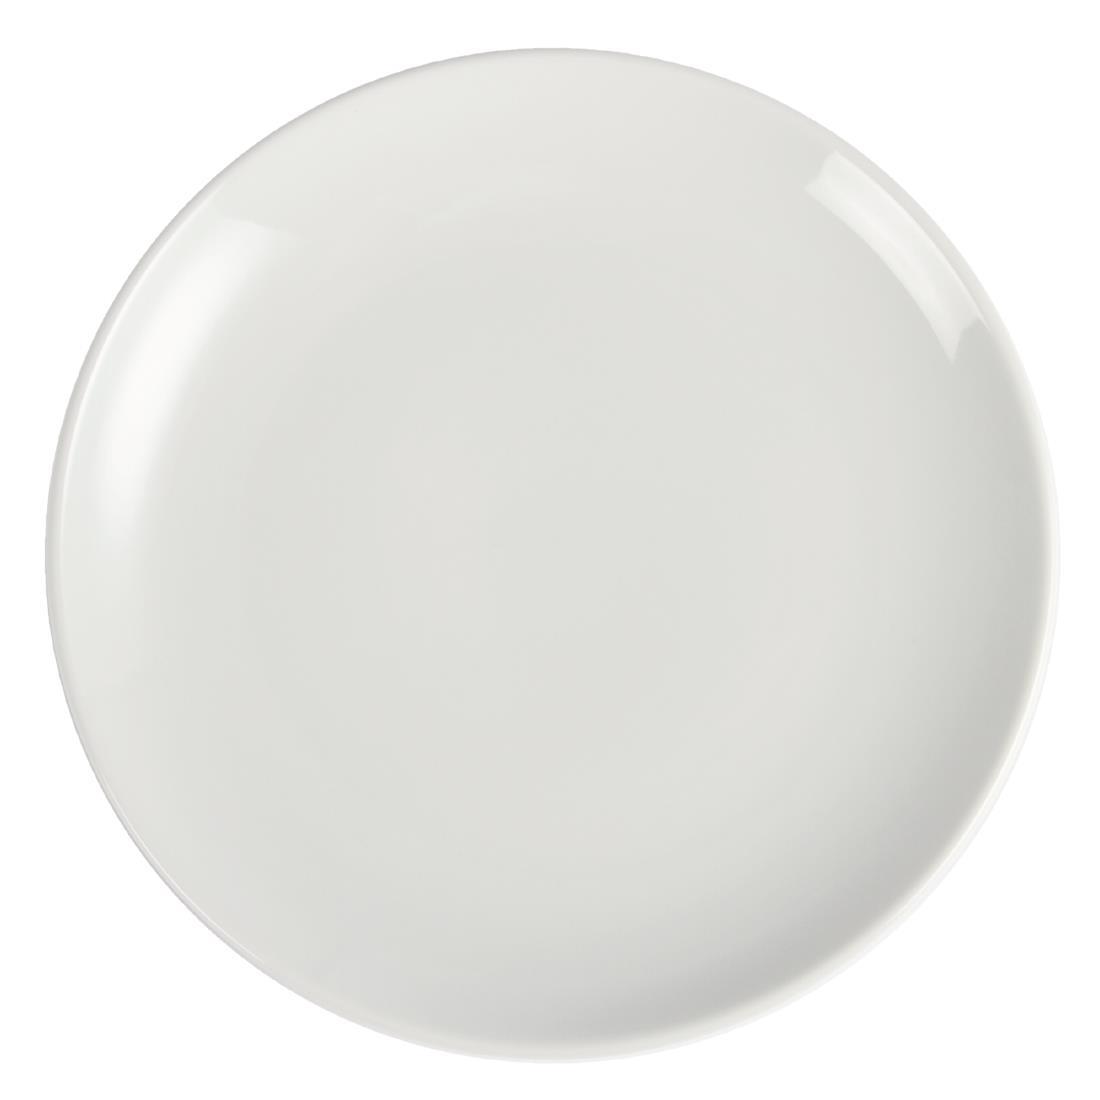 Olympia Whiteware Coupe Plates 230mm (Pack of 12) - U078  - 4